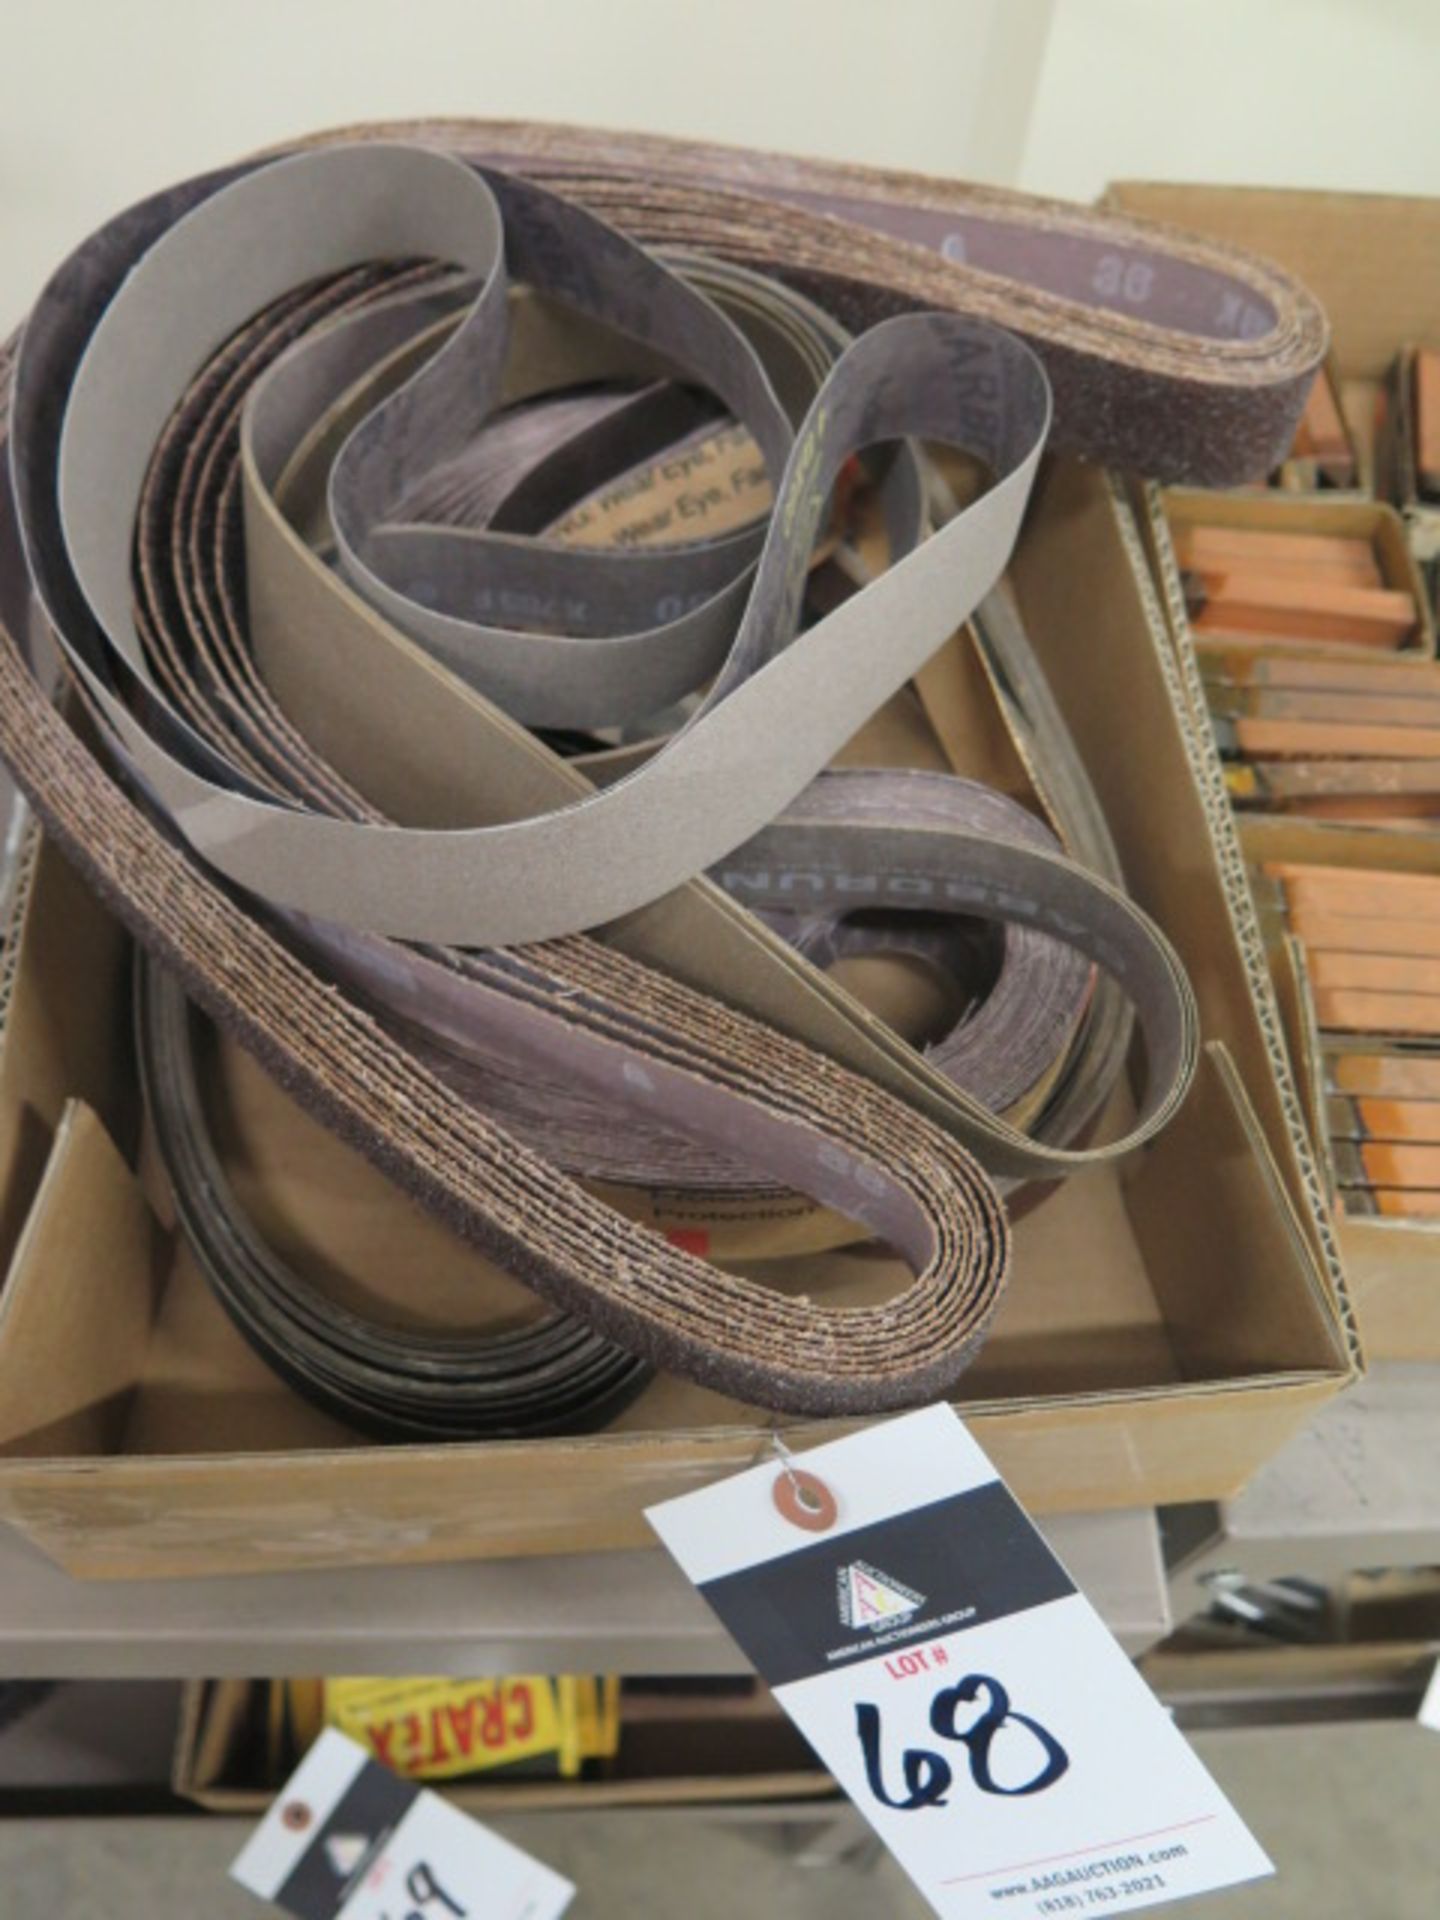 1 1/2" and 1" Sanding Belts